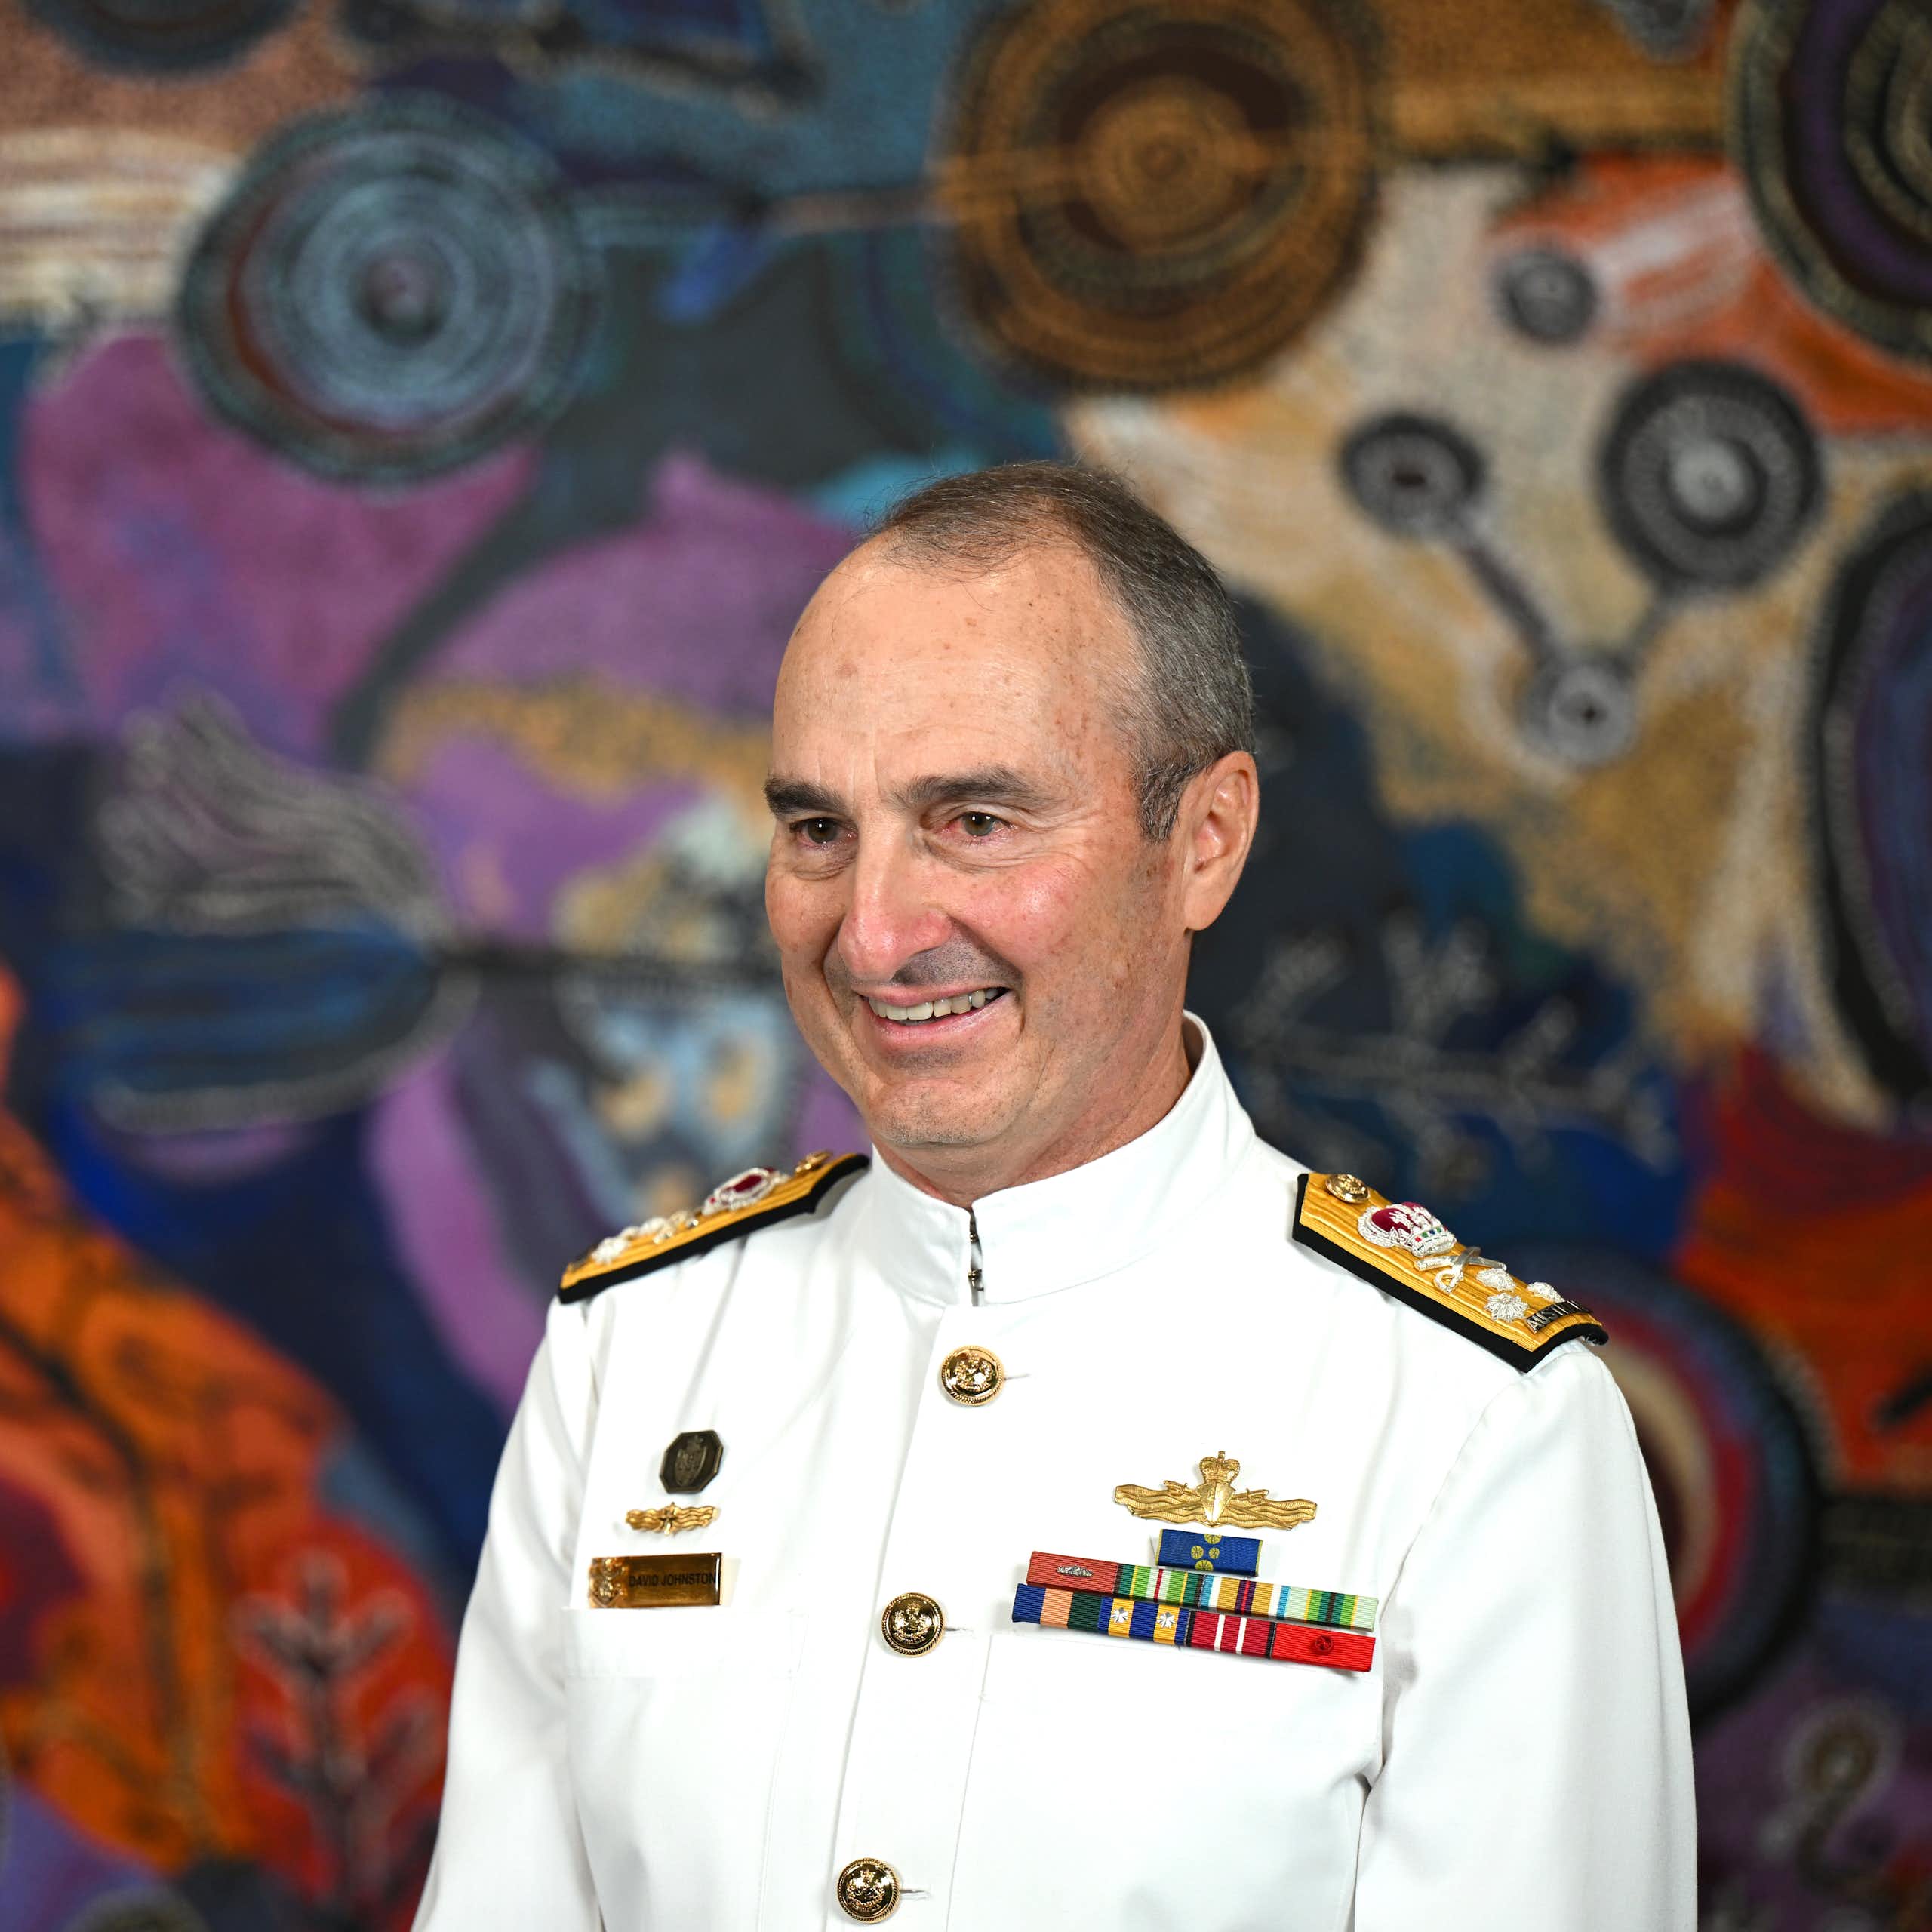 A man in a white navy uniform smiles in front of a multicoloured backdrop